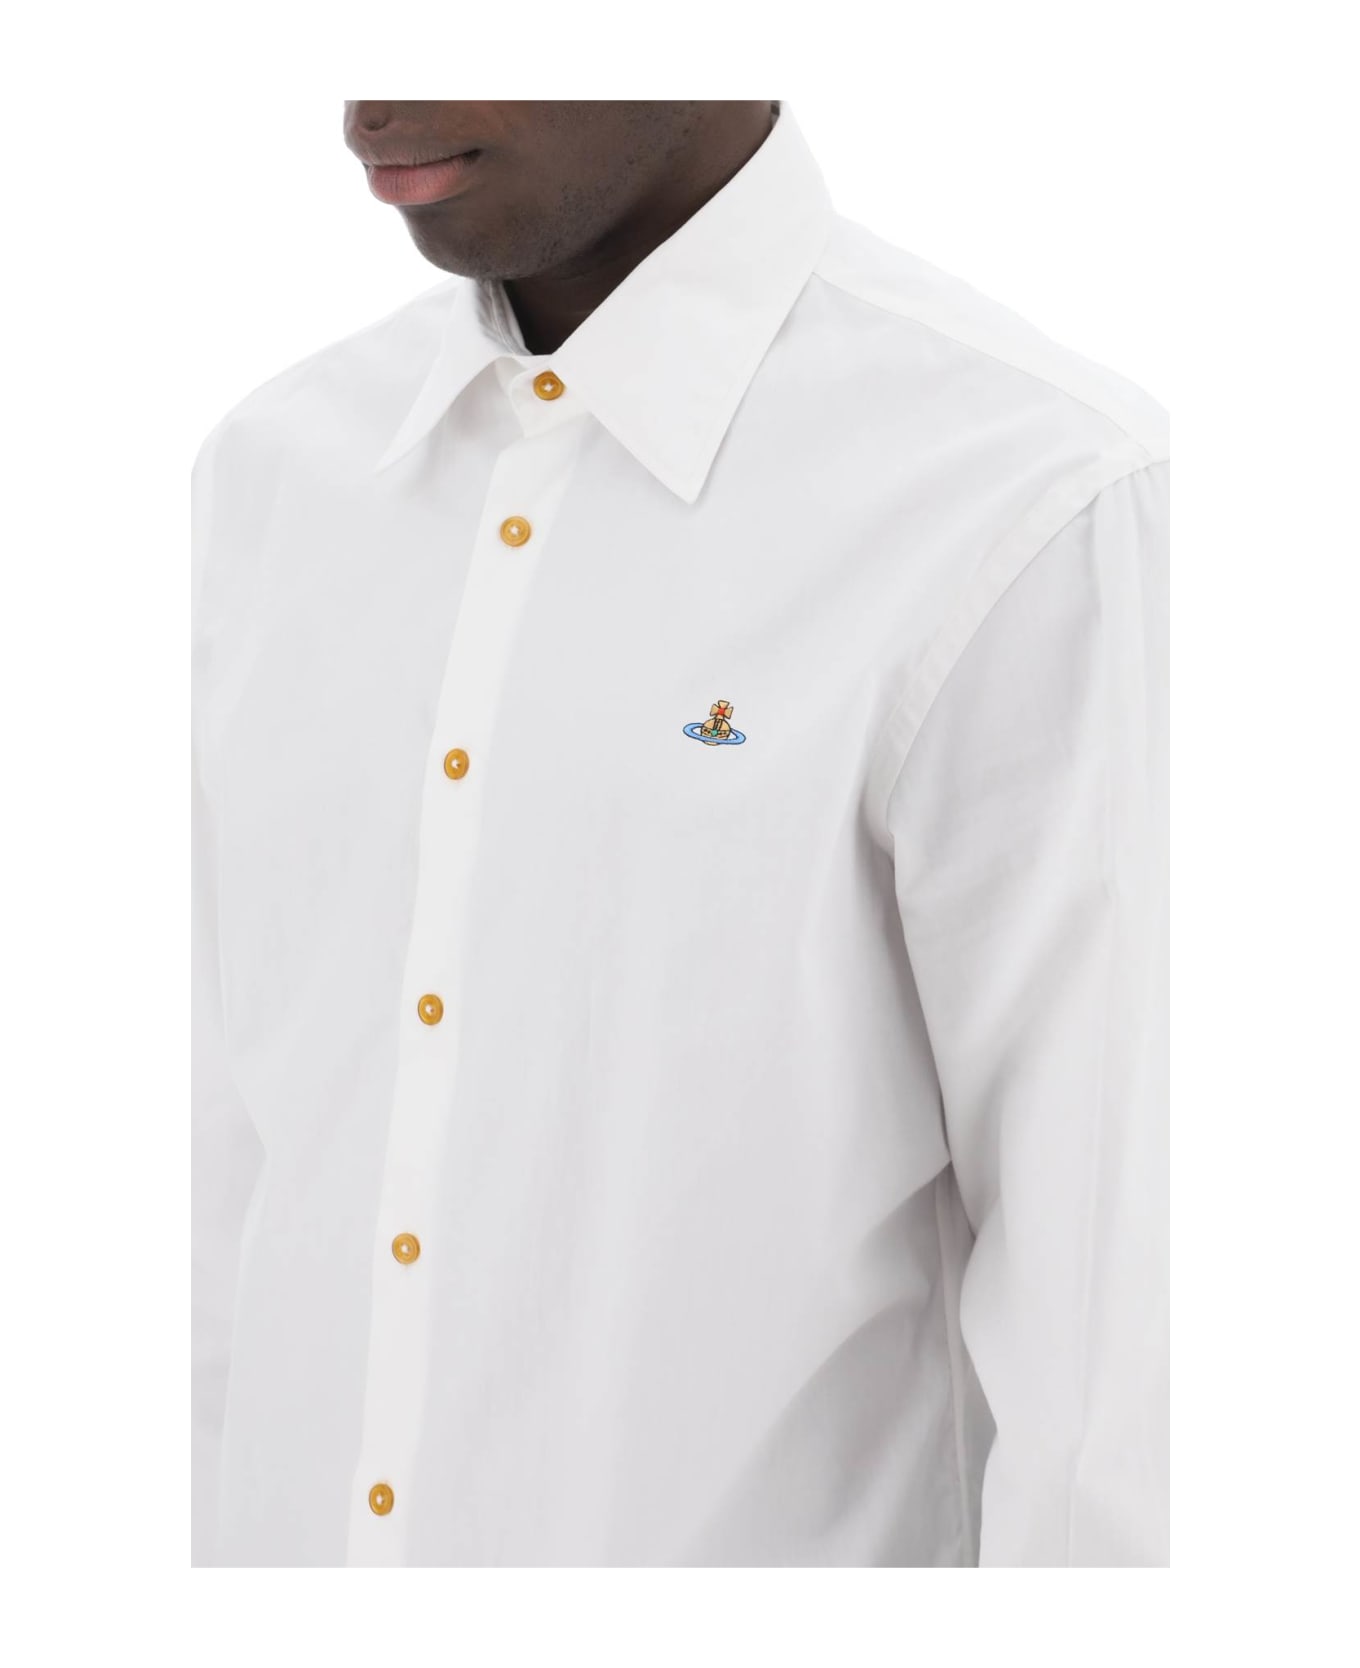 Vivienne Westwood Ghost Shirt With Orb Embroidery - WHITE (White)